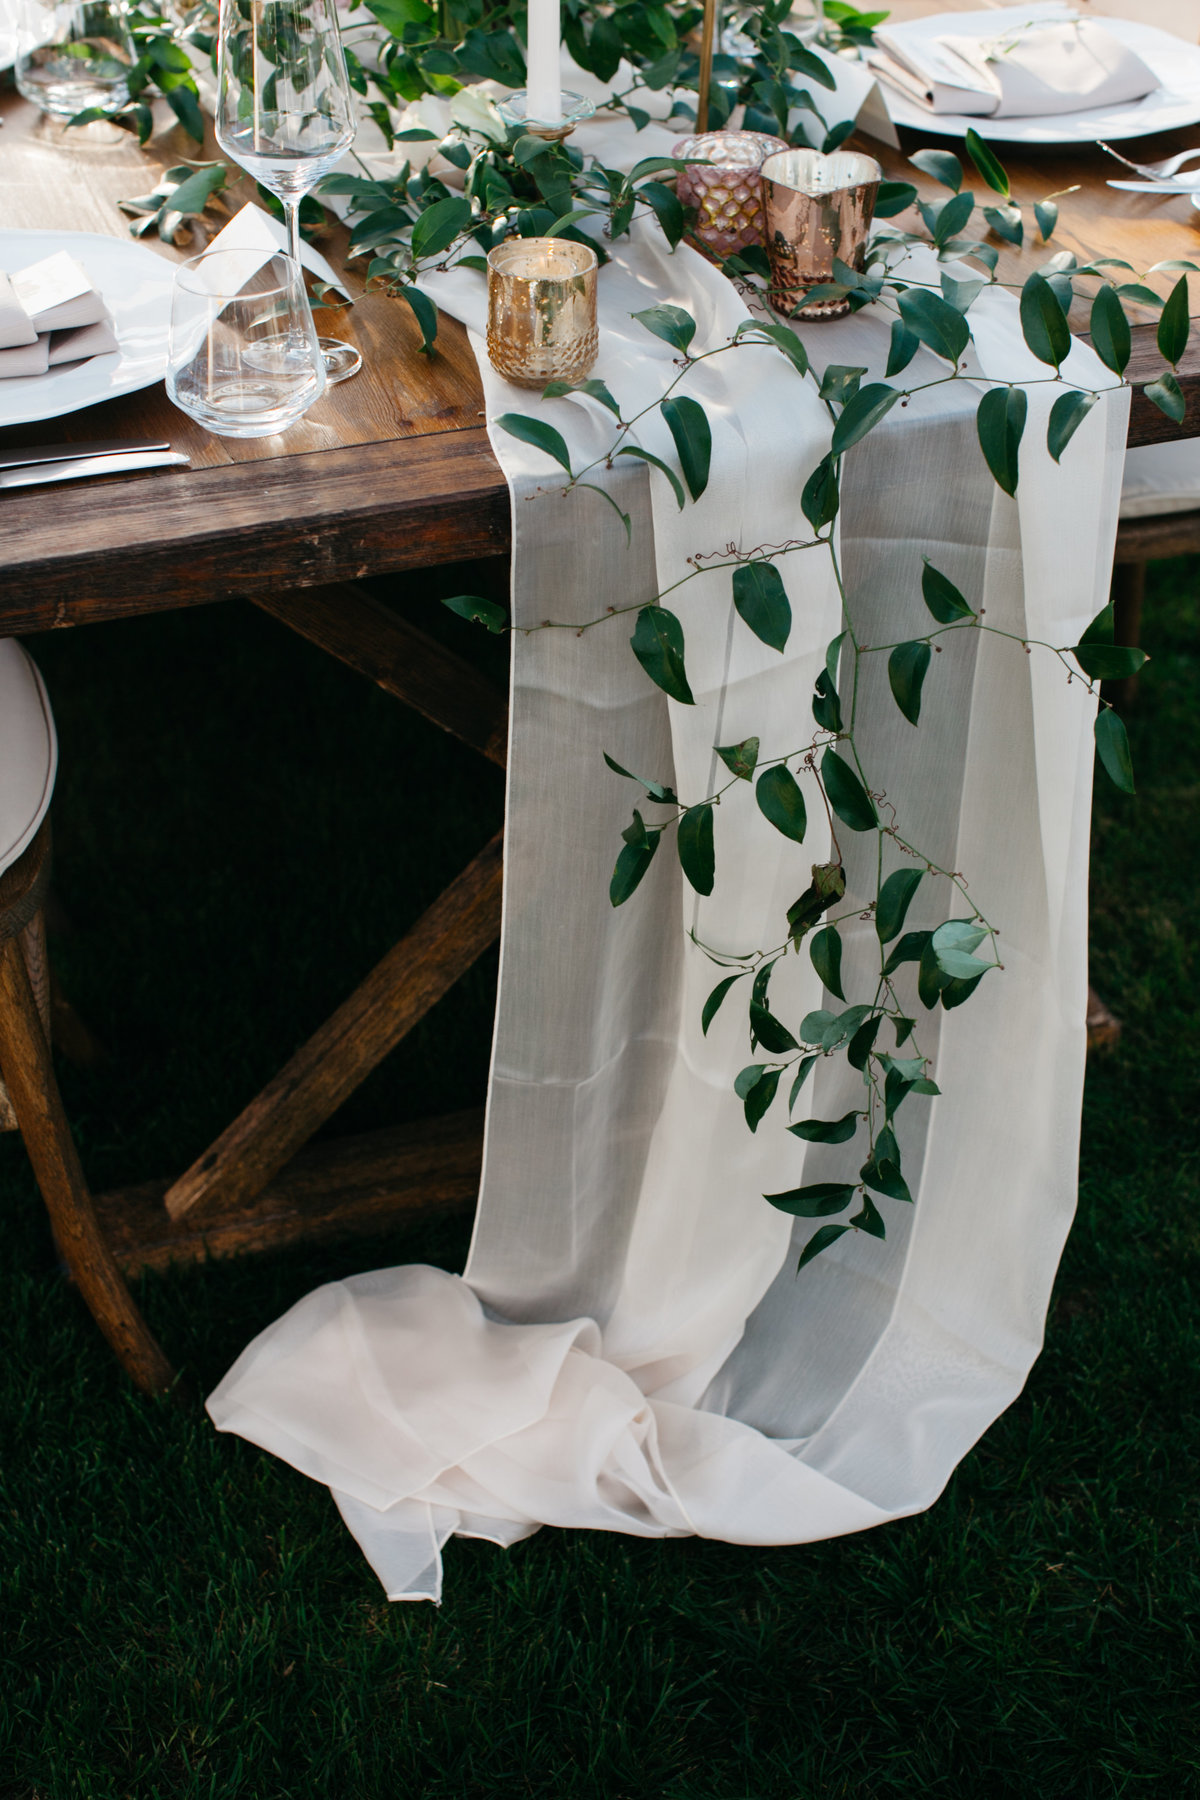 Cream sheer table runner covered in smilax vine and candles make for a truly romantic wedding.